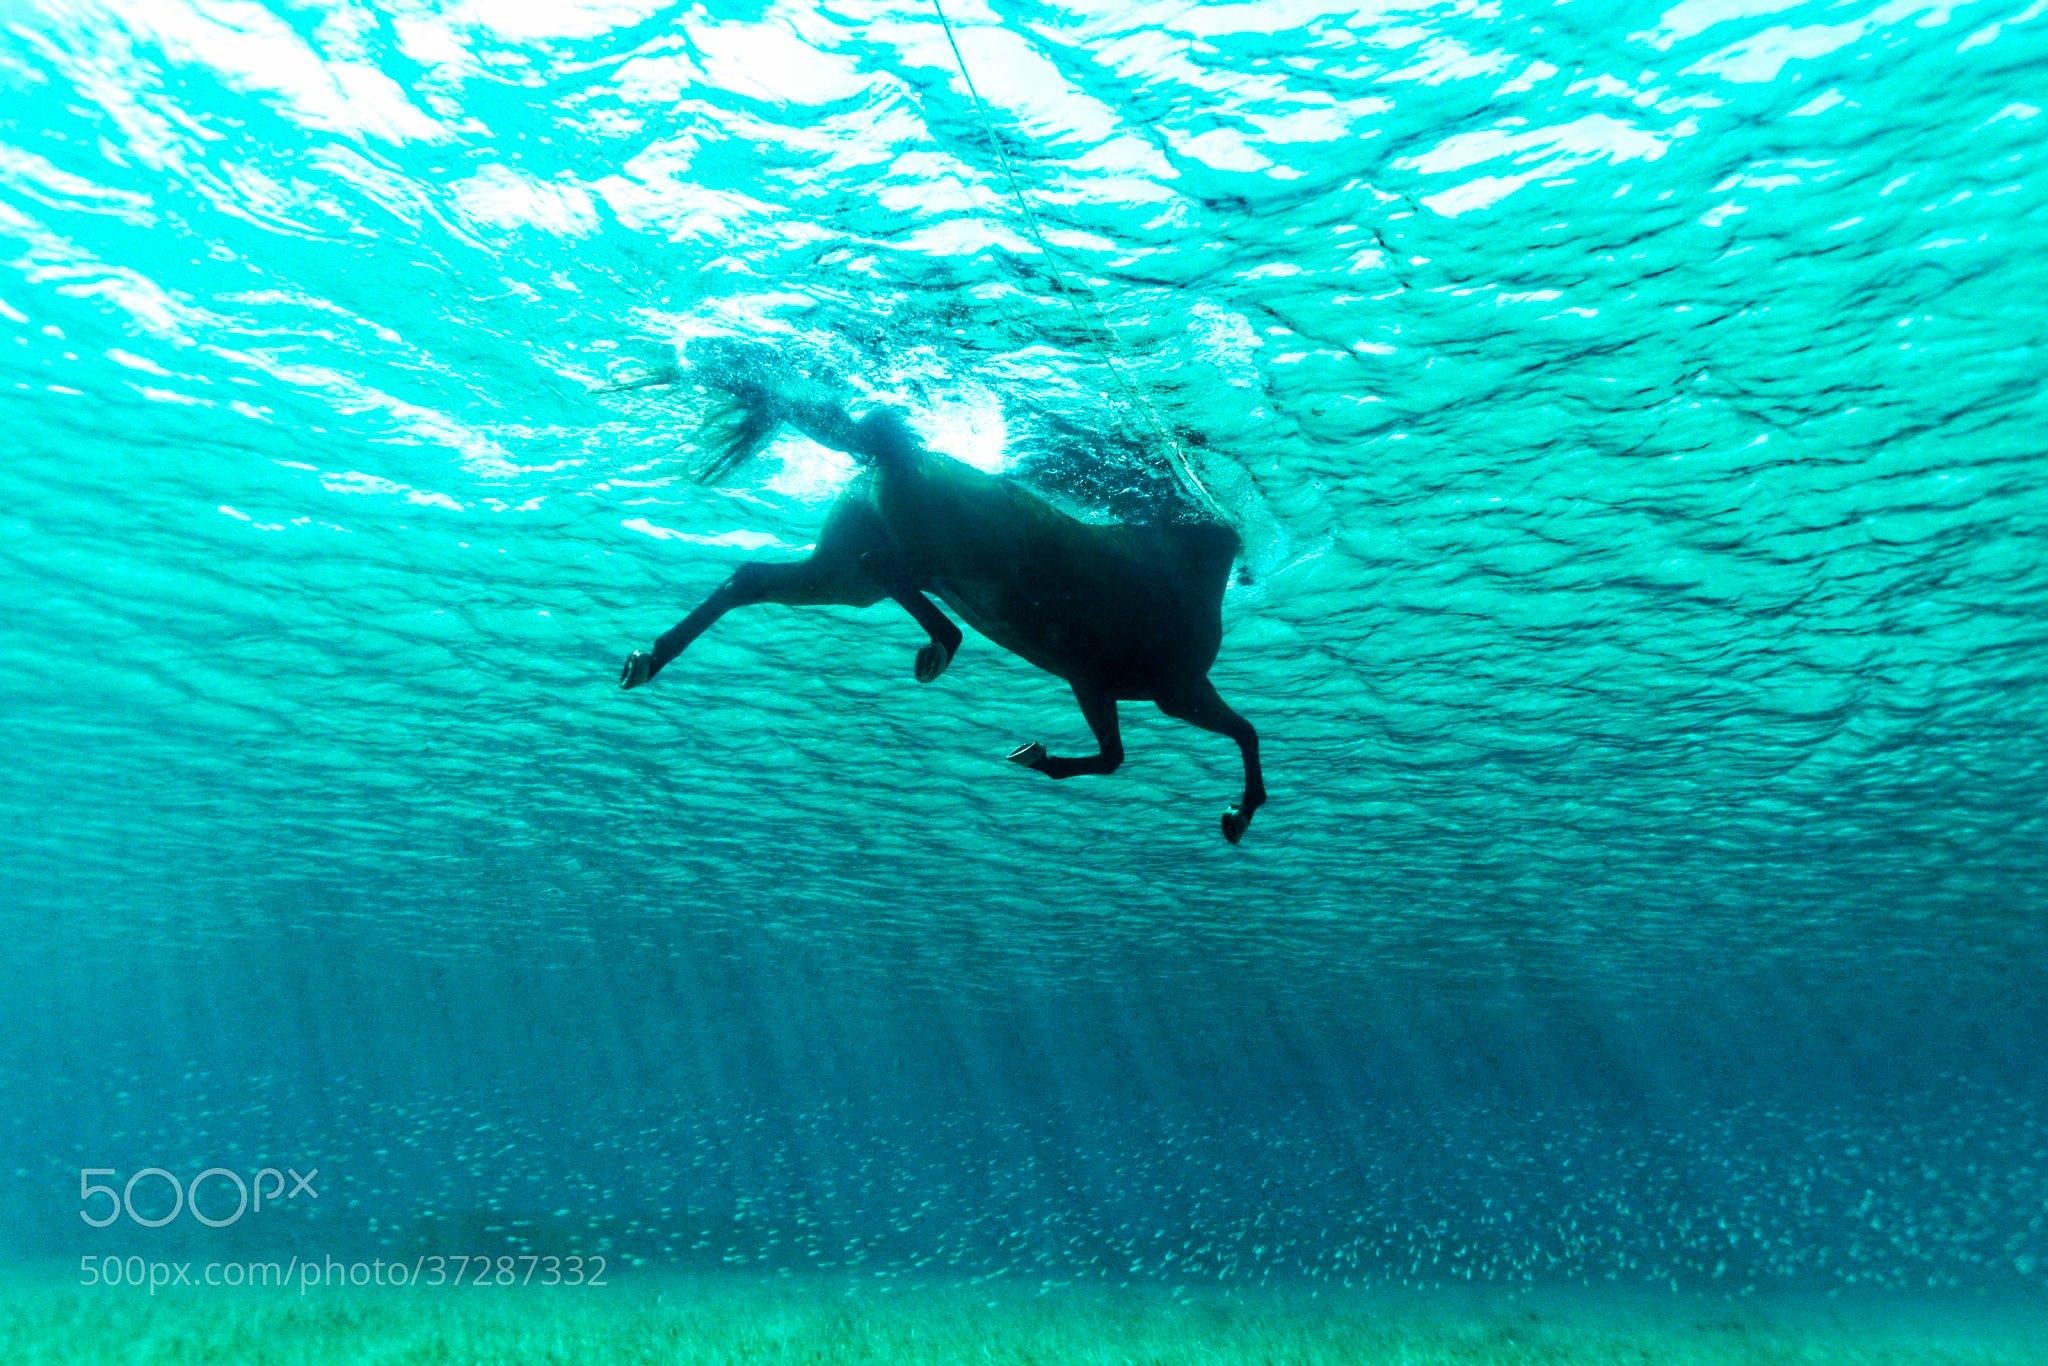 General 2048x1366 water underwater nature animals swimming horse sunlight 500px sea turquoise cyan